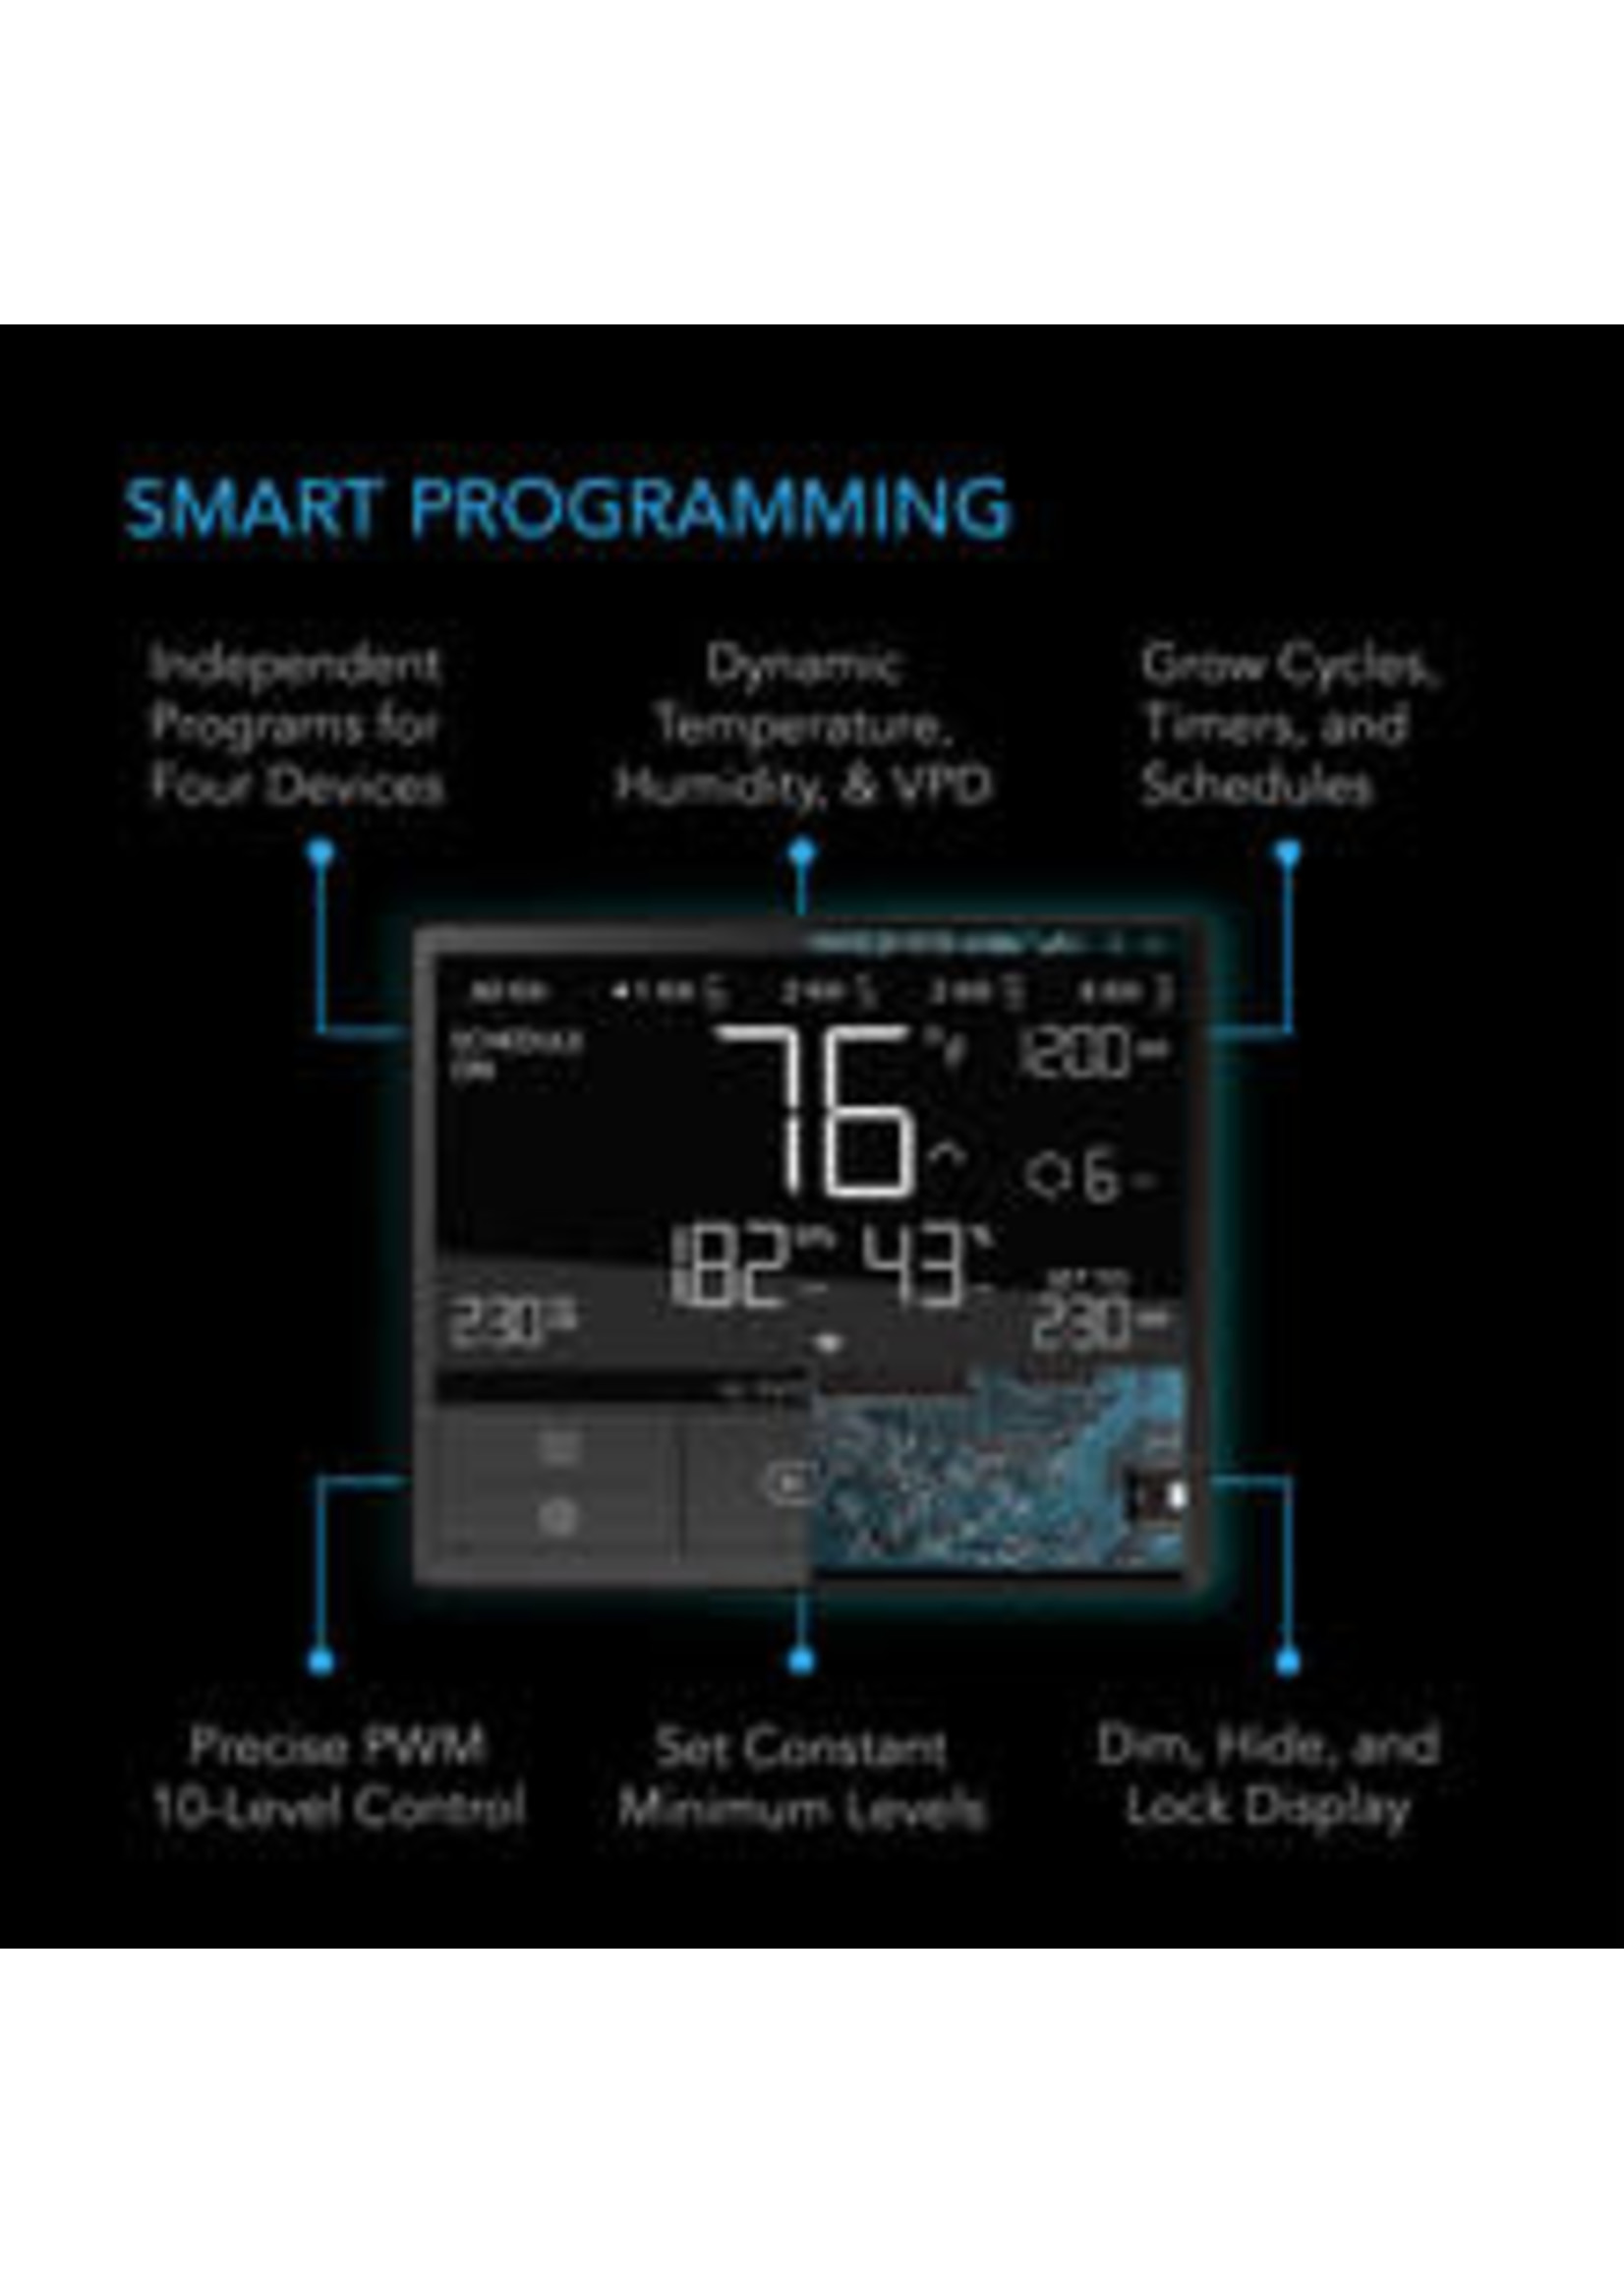 AC Infinity AC Infinity Controller 69 PRO INDEPENDENT PROGRAMS FOR FOUR DEVICES, DYNAMIC VPD, TEMPERATURE, HUMIDITY, SCHEDULING, CYCLES, LEVELS CONTROL, DATA APP, BLUETOOTH + WIFI